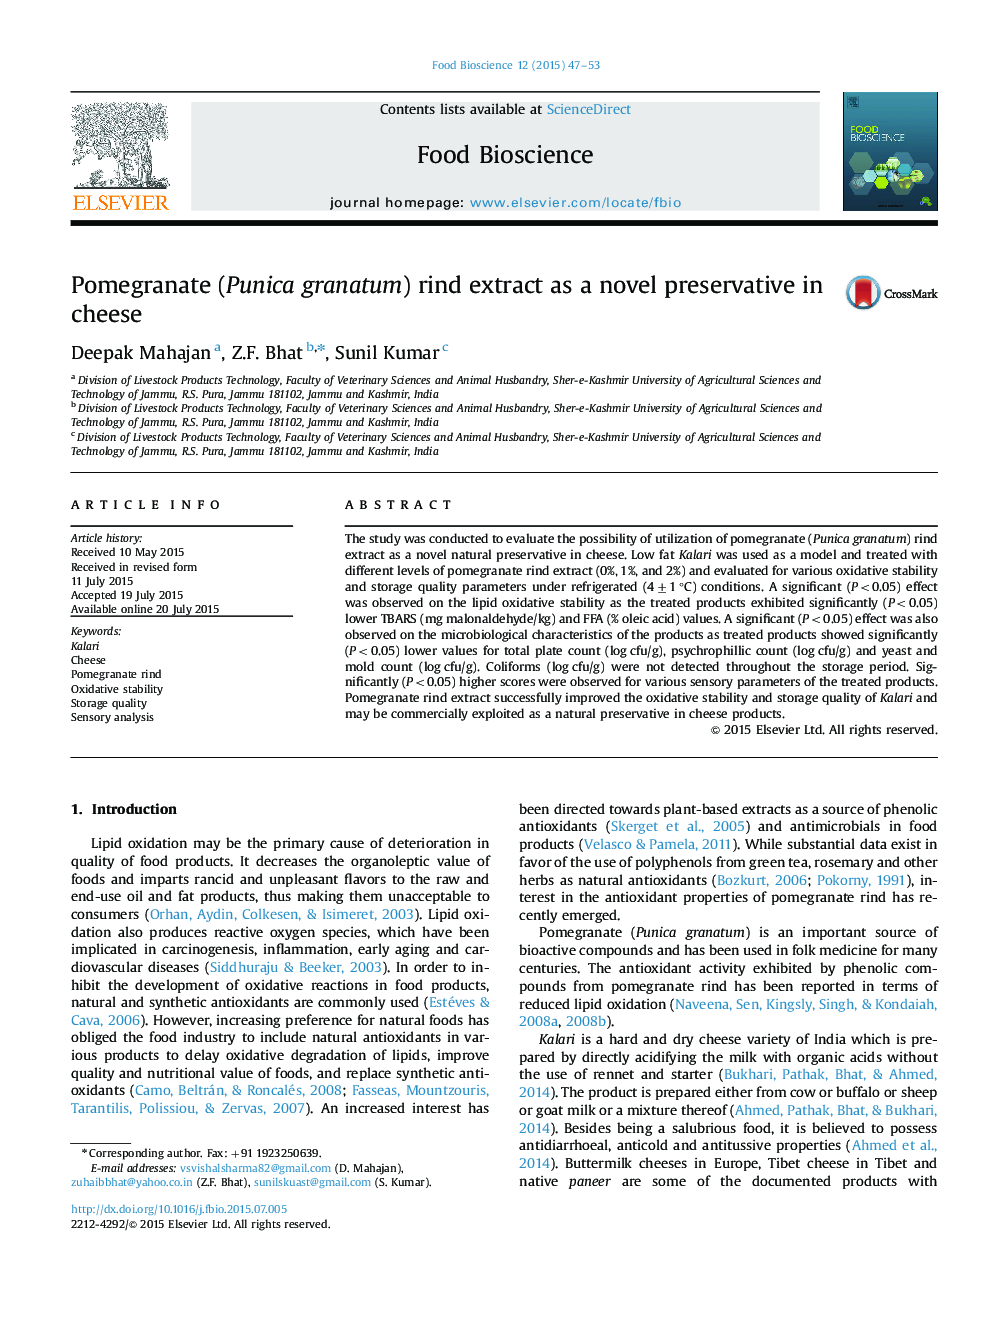 Pomegranate (Punica granatum) rind extract as a novel preservative in cheese